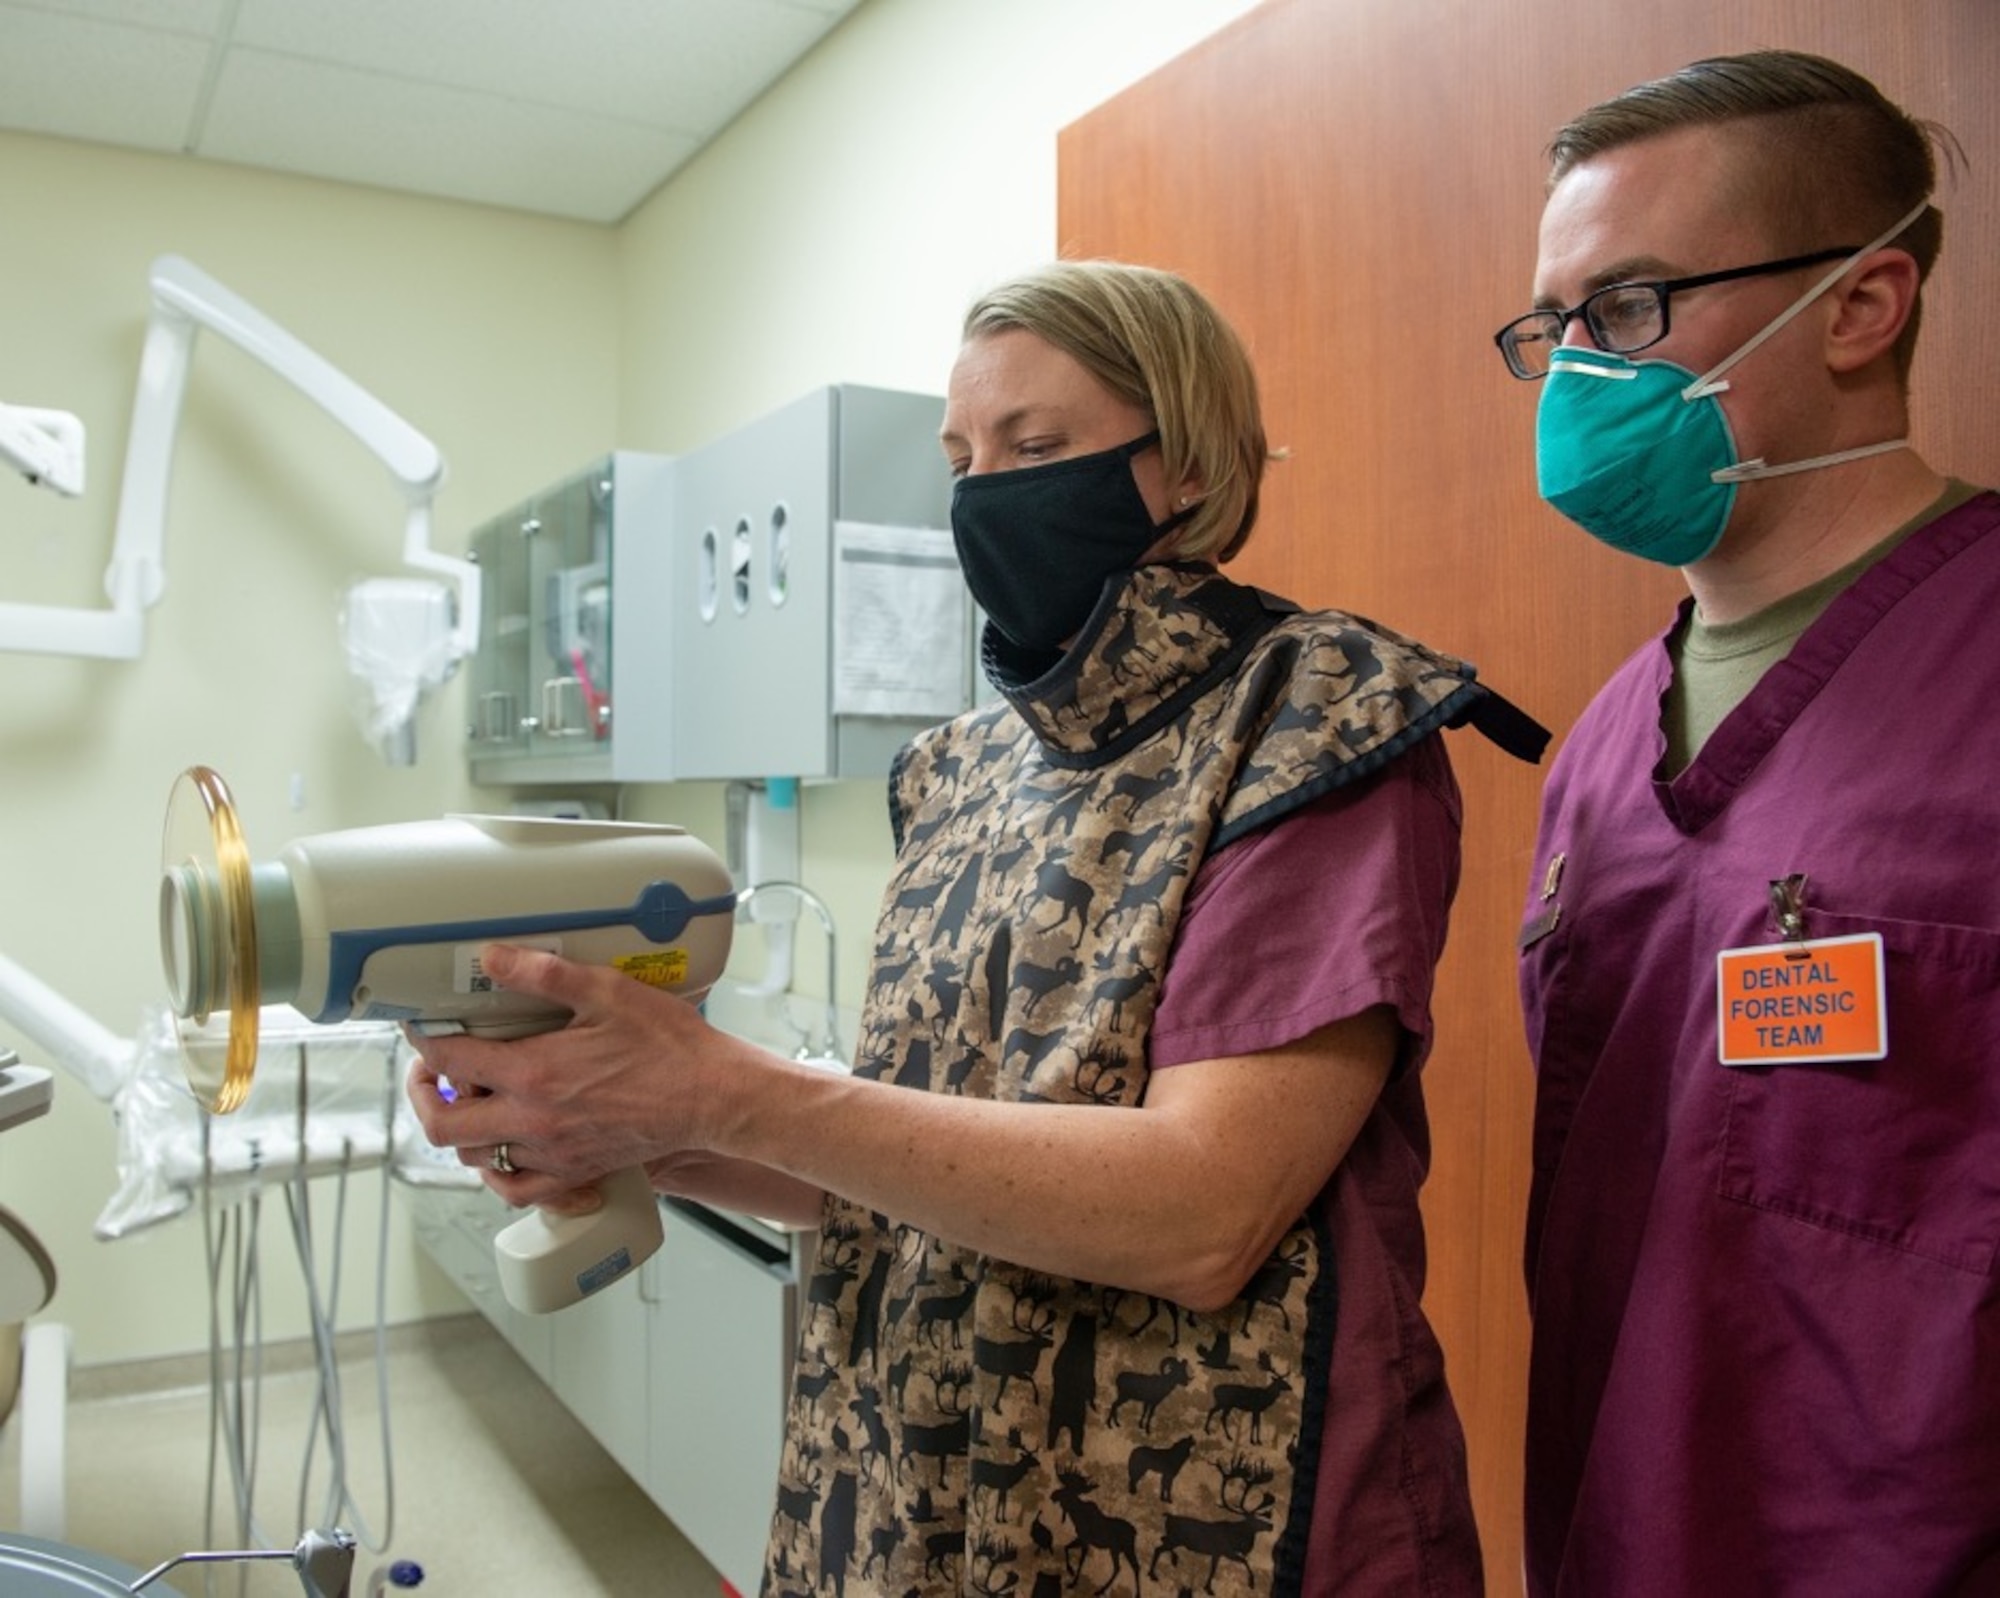 U.S. Air Force Capt. Ryan Zarnowski, right, a general dentist assigned to the 673d Dental Squadron, teaches U.S. Air Force Col. Kirsten Aguilar, Joint Base Elmendorf-Richardson and 673d Air Base Wing commander, how to operate an X-ray unit at JBER, Alaska, March 2, 2021.